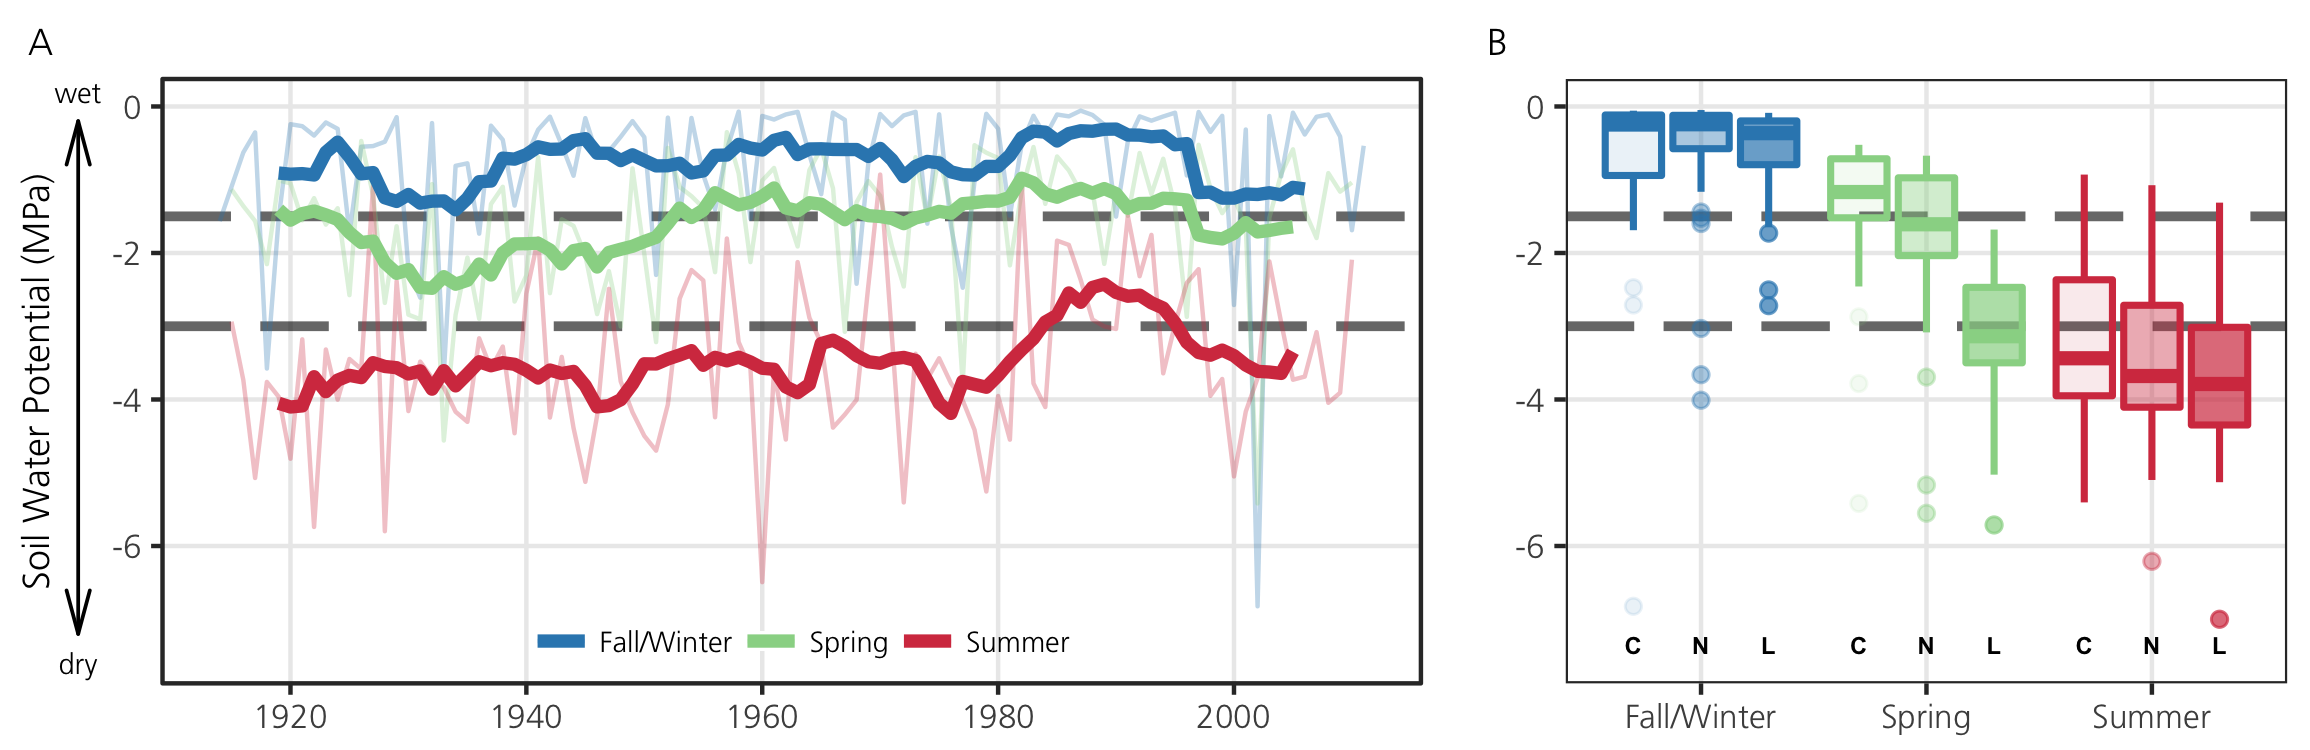 Two part graph. Left: Line graph of soilwater potential by season (1920 to 2000). Seasons are: Fall/Winter, Spring and Summer. Right: Box plot of soilwater potential by season for the current), near future and long-term future.